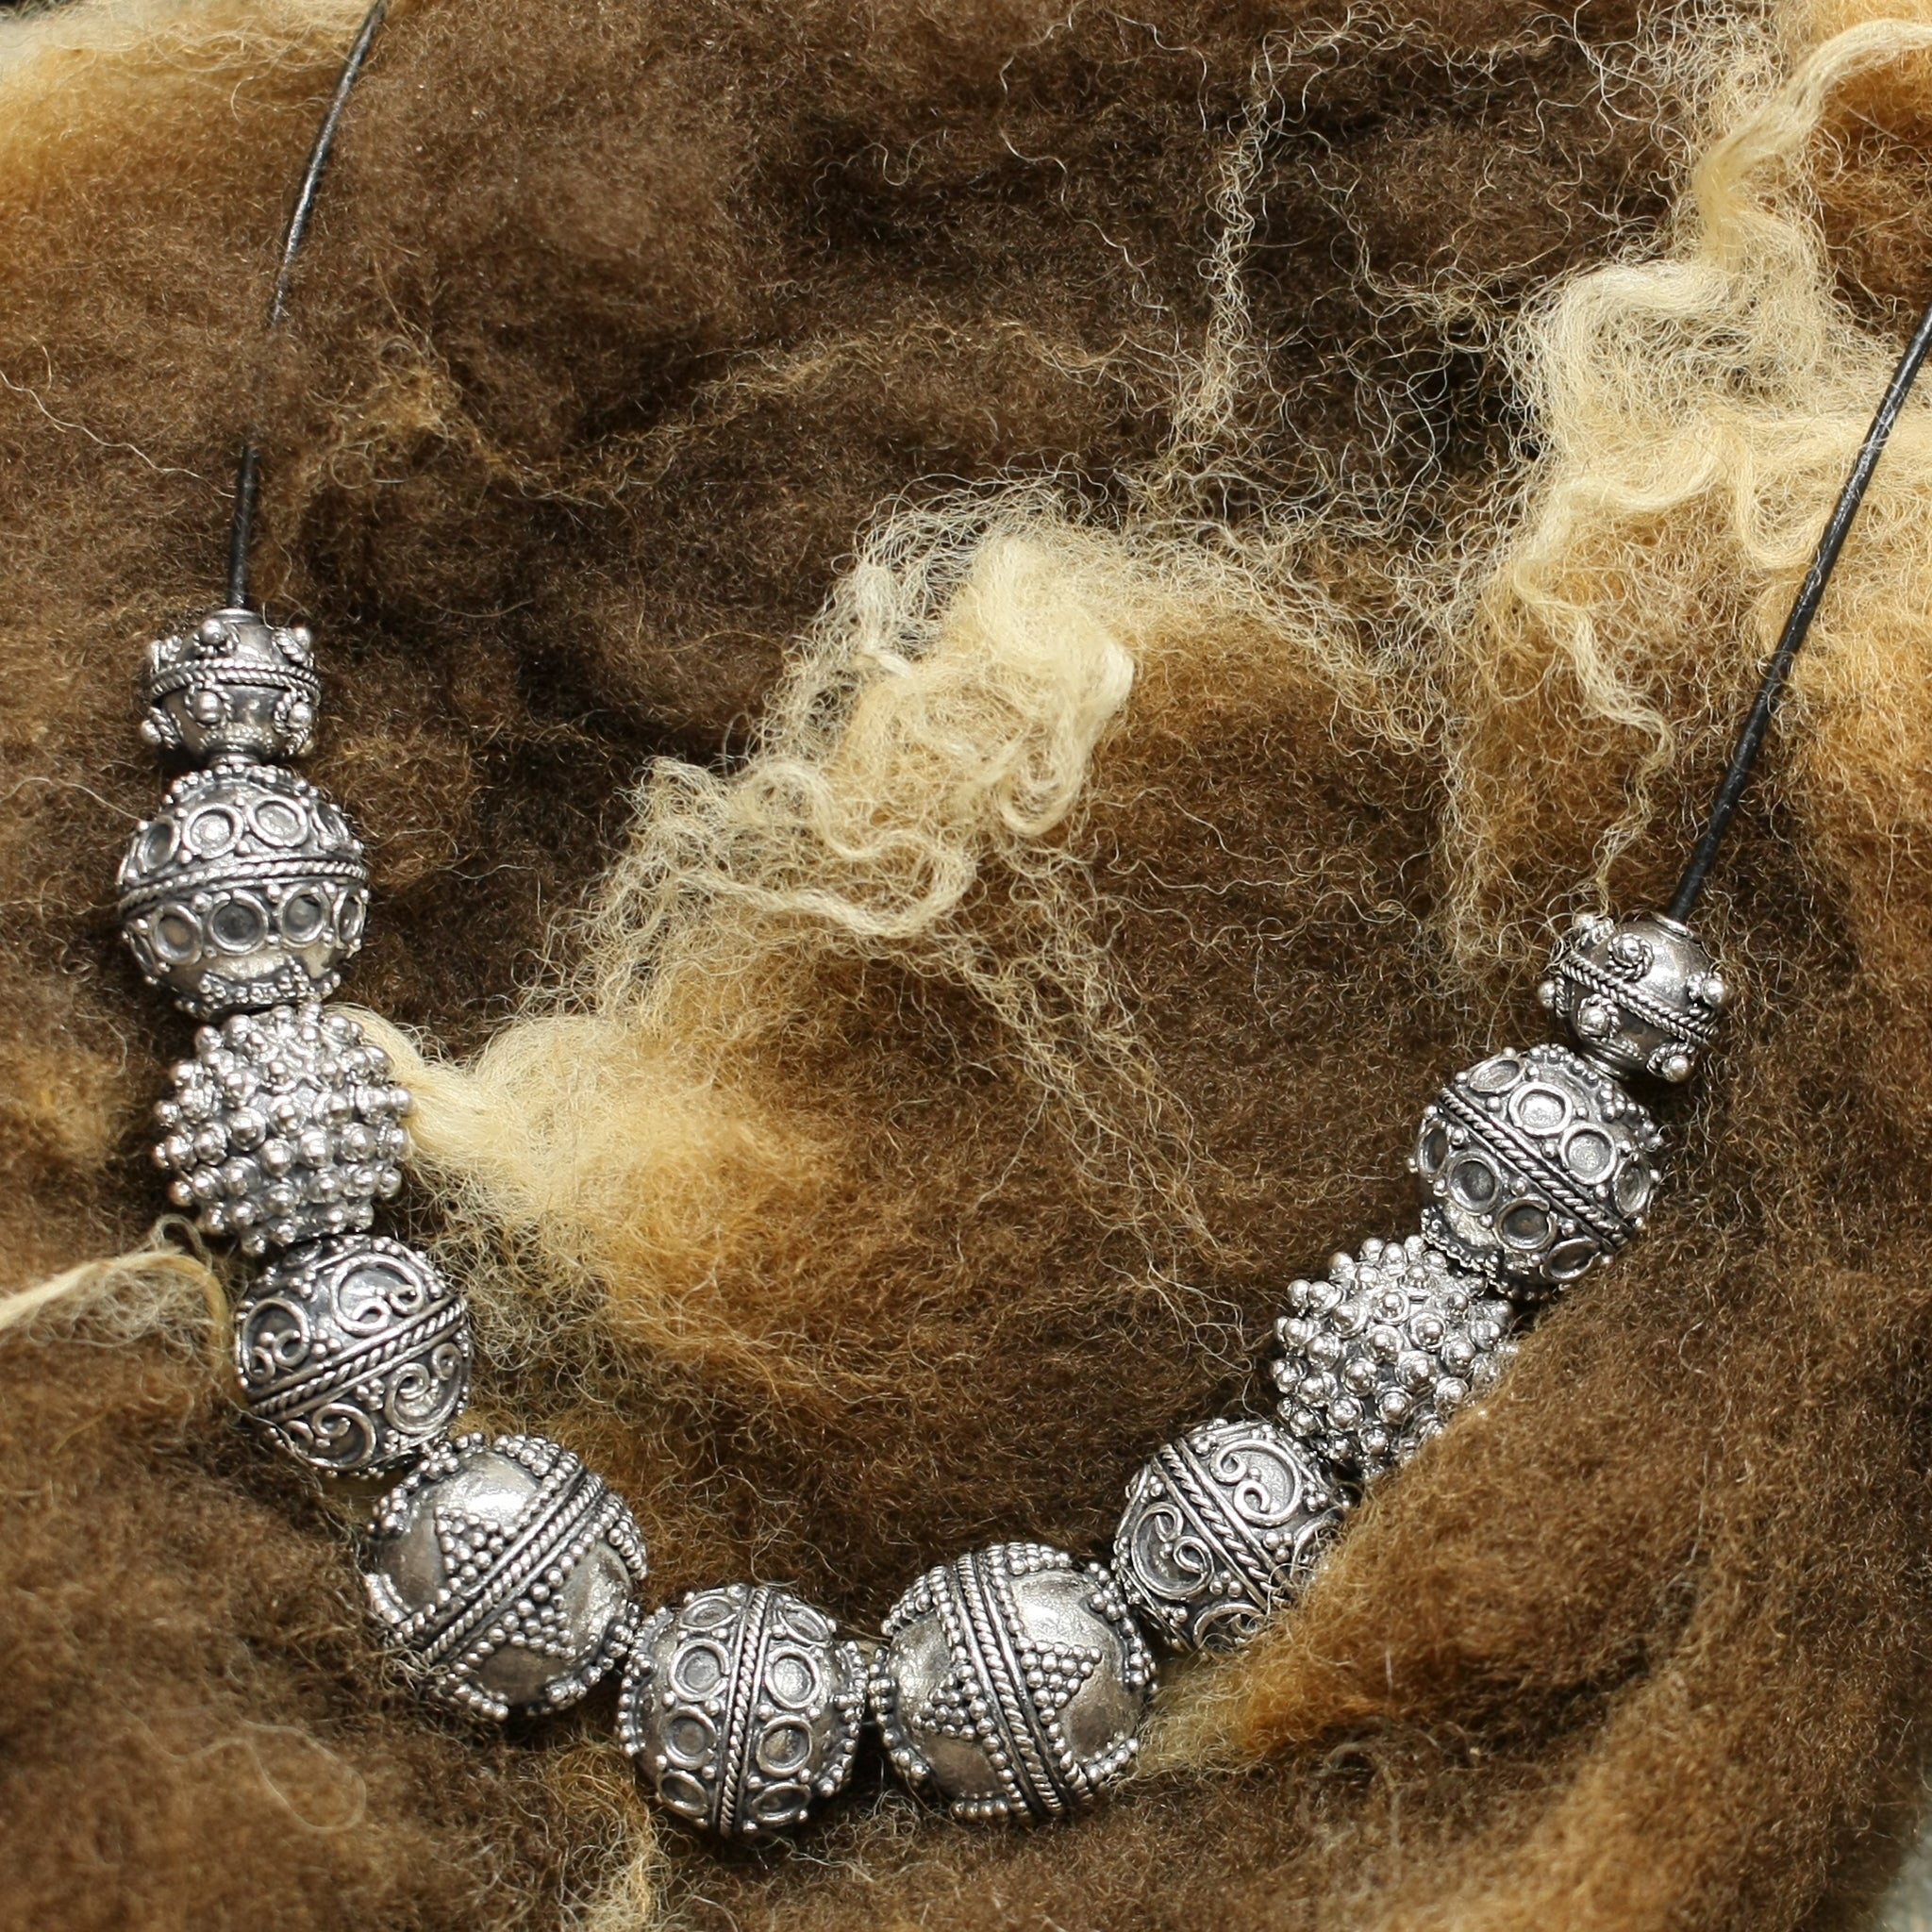 Silver Viking Beads from Visby on Leather Thong on Wool